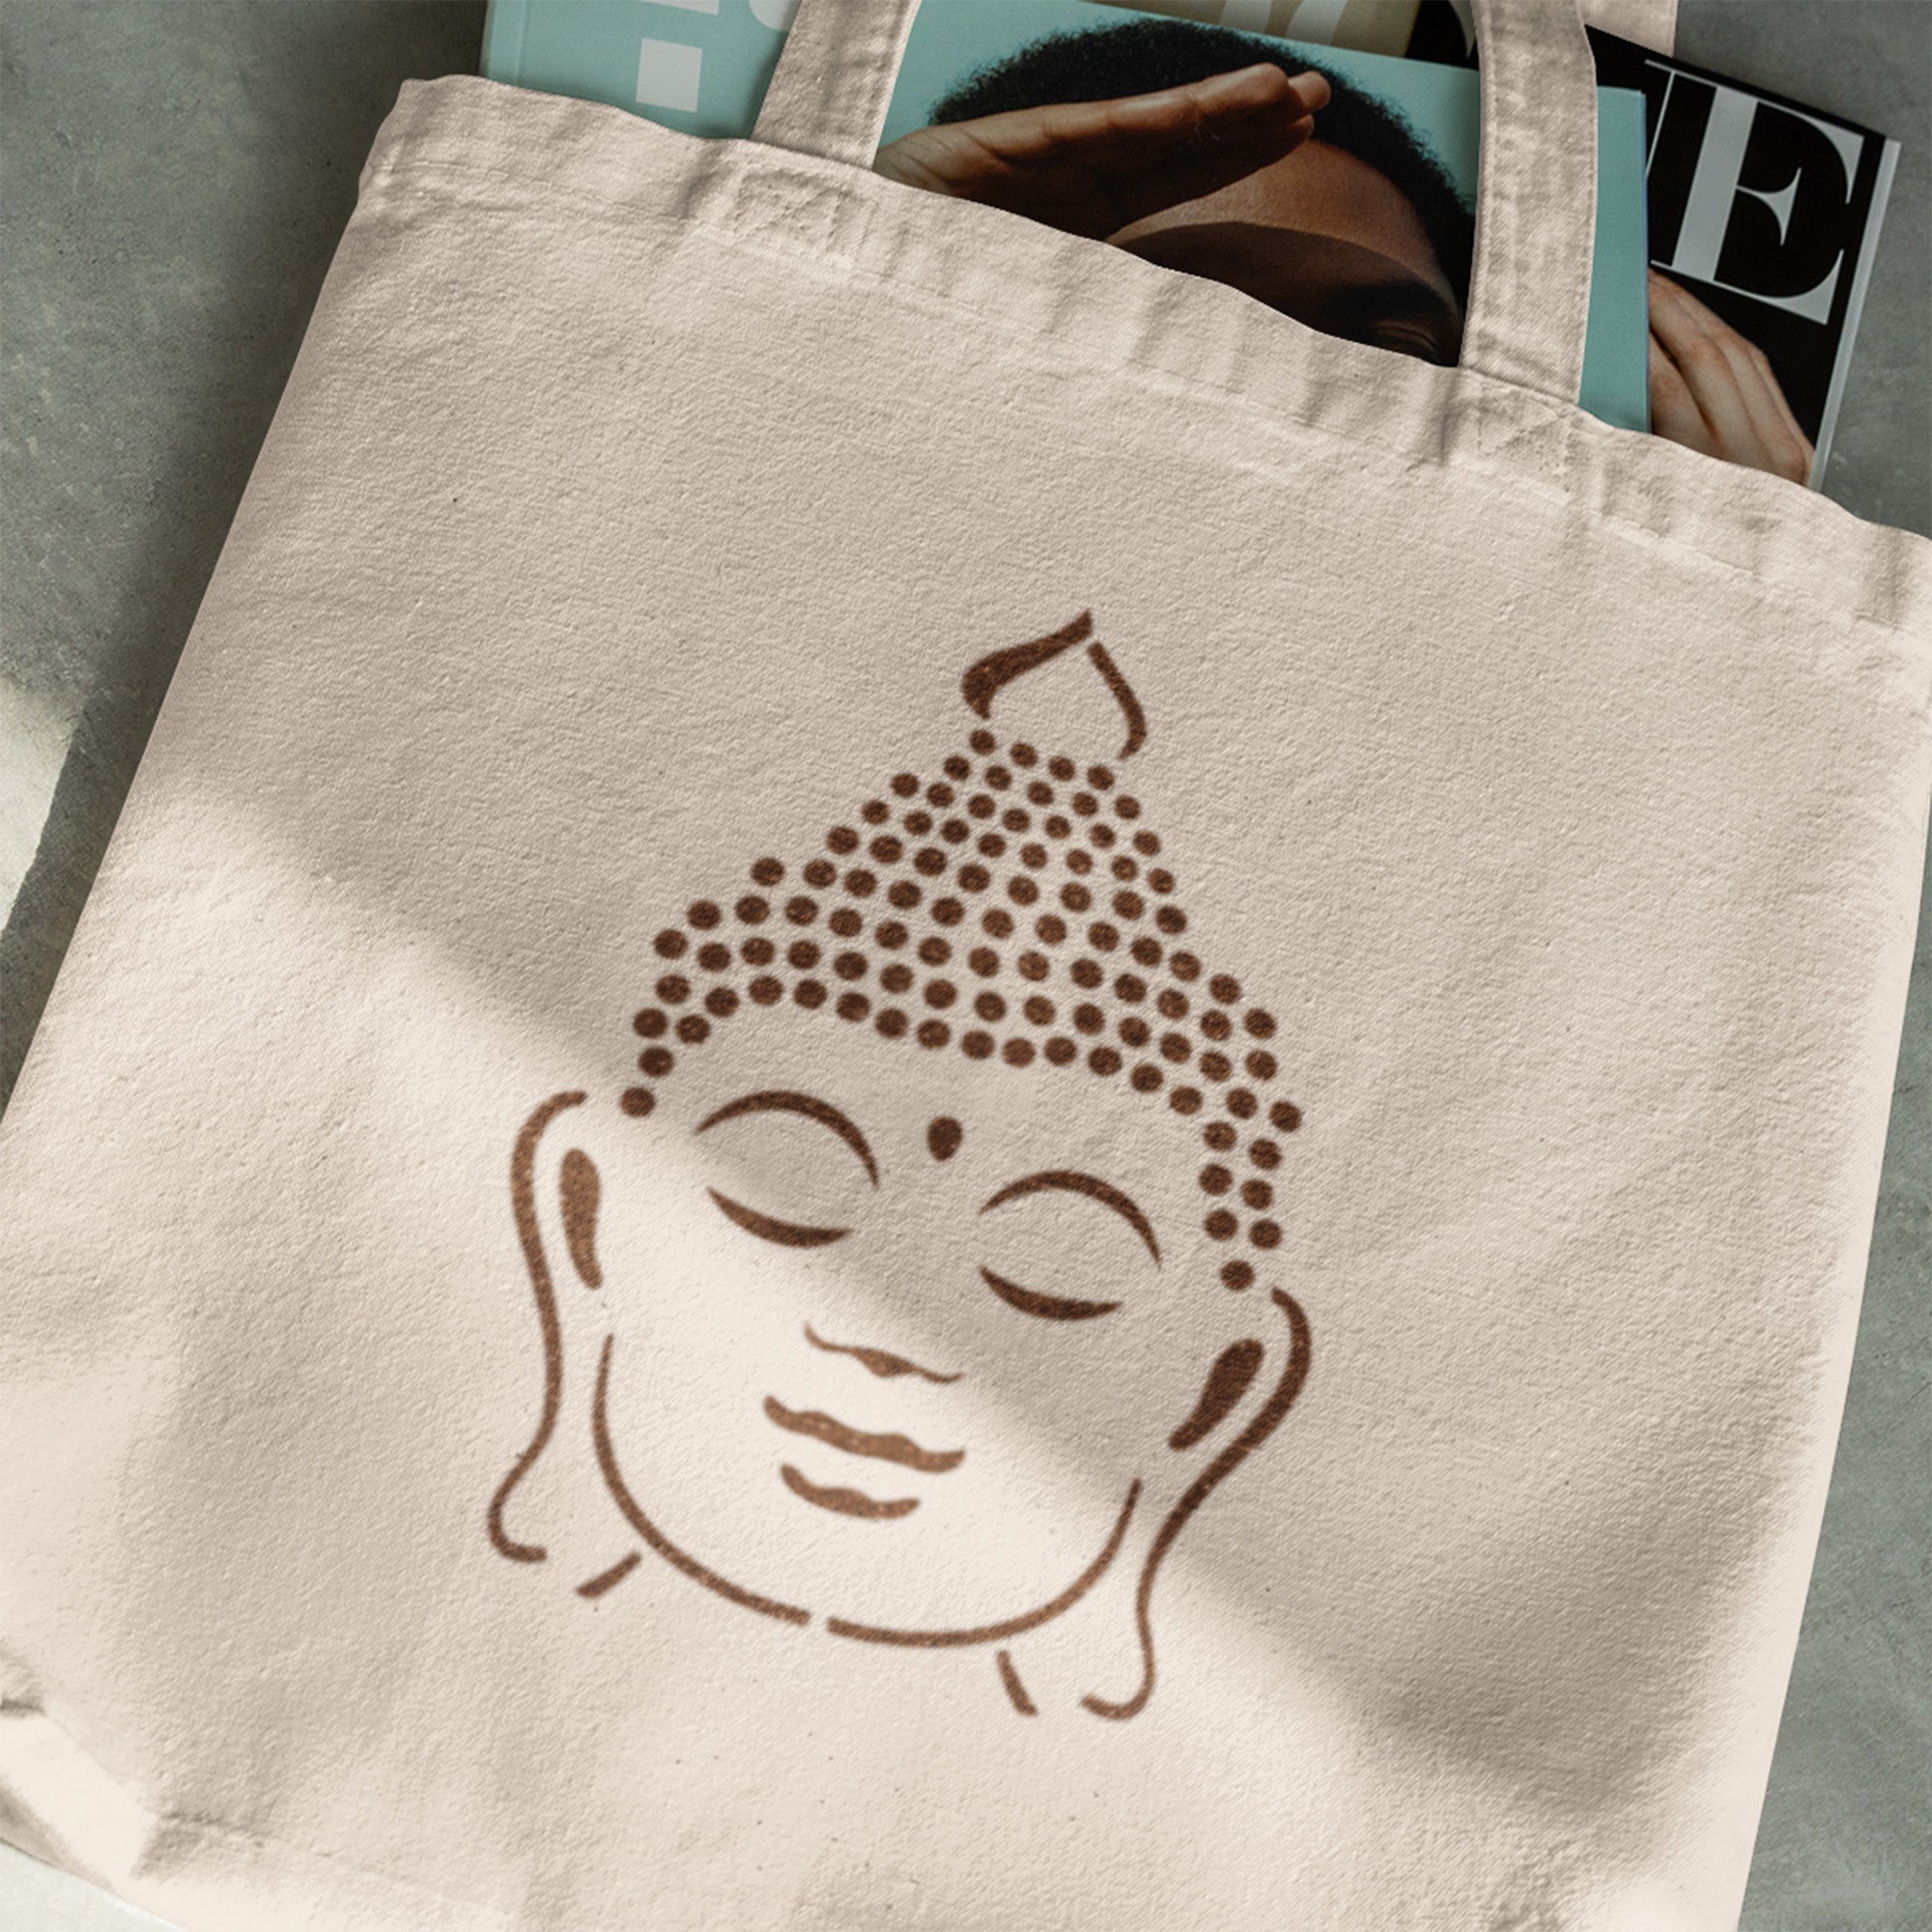 CraftStar Buddha Head Stencil Used For Fabric Painting